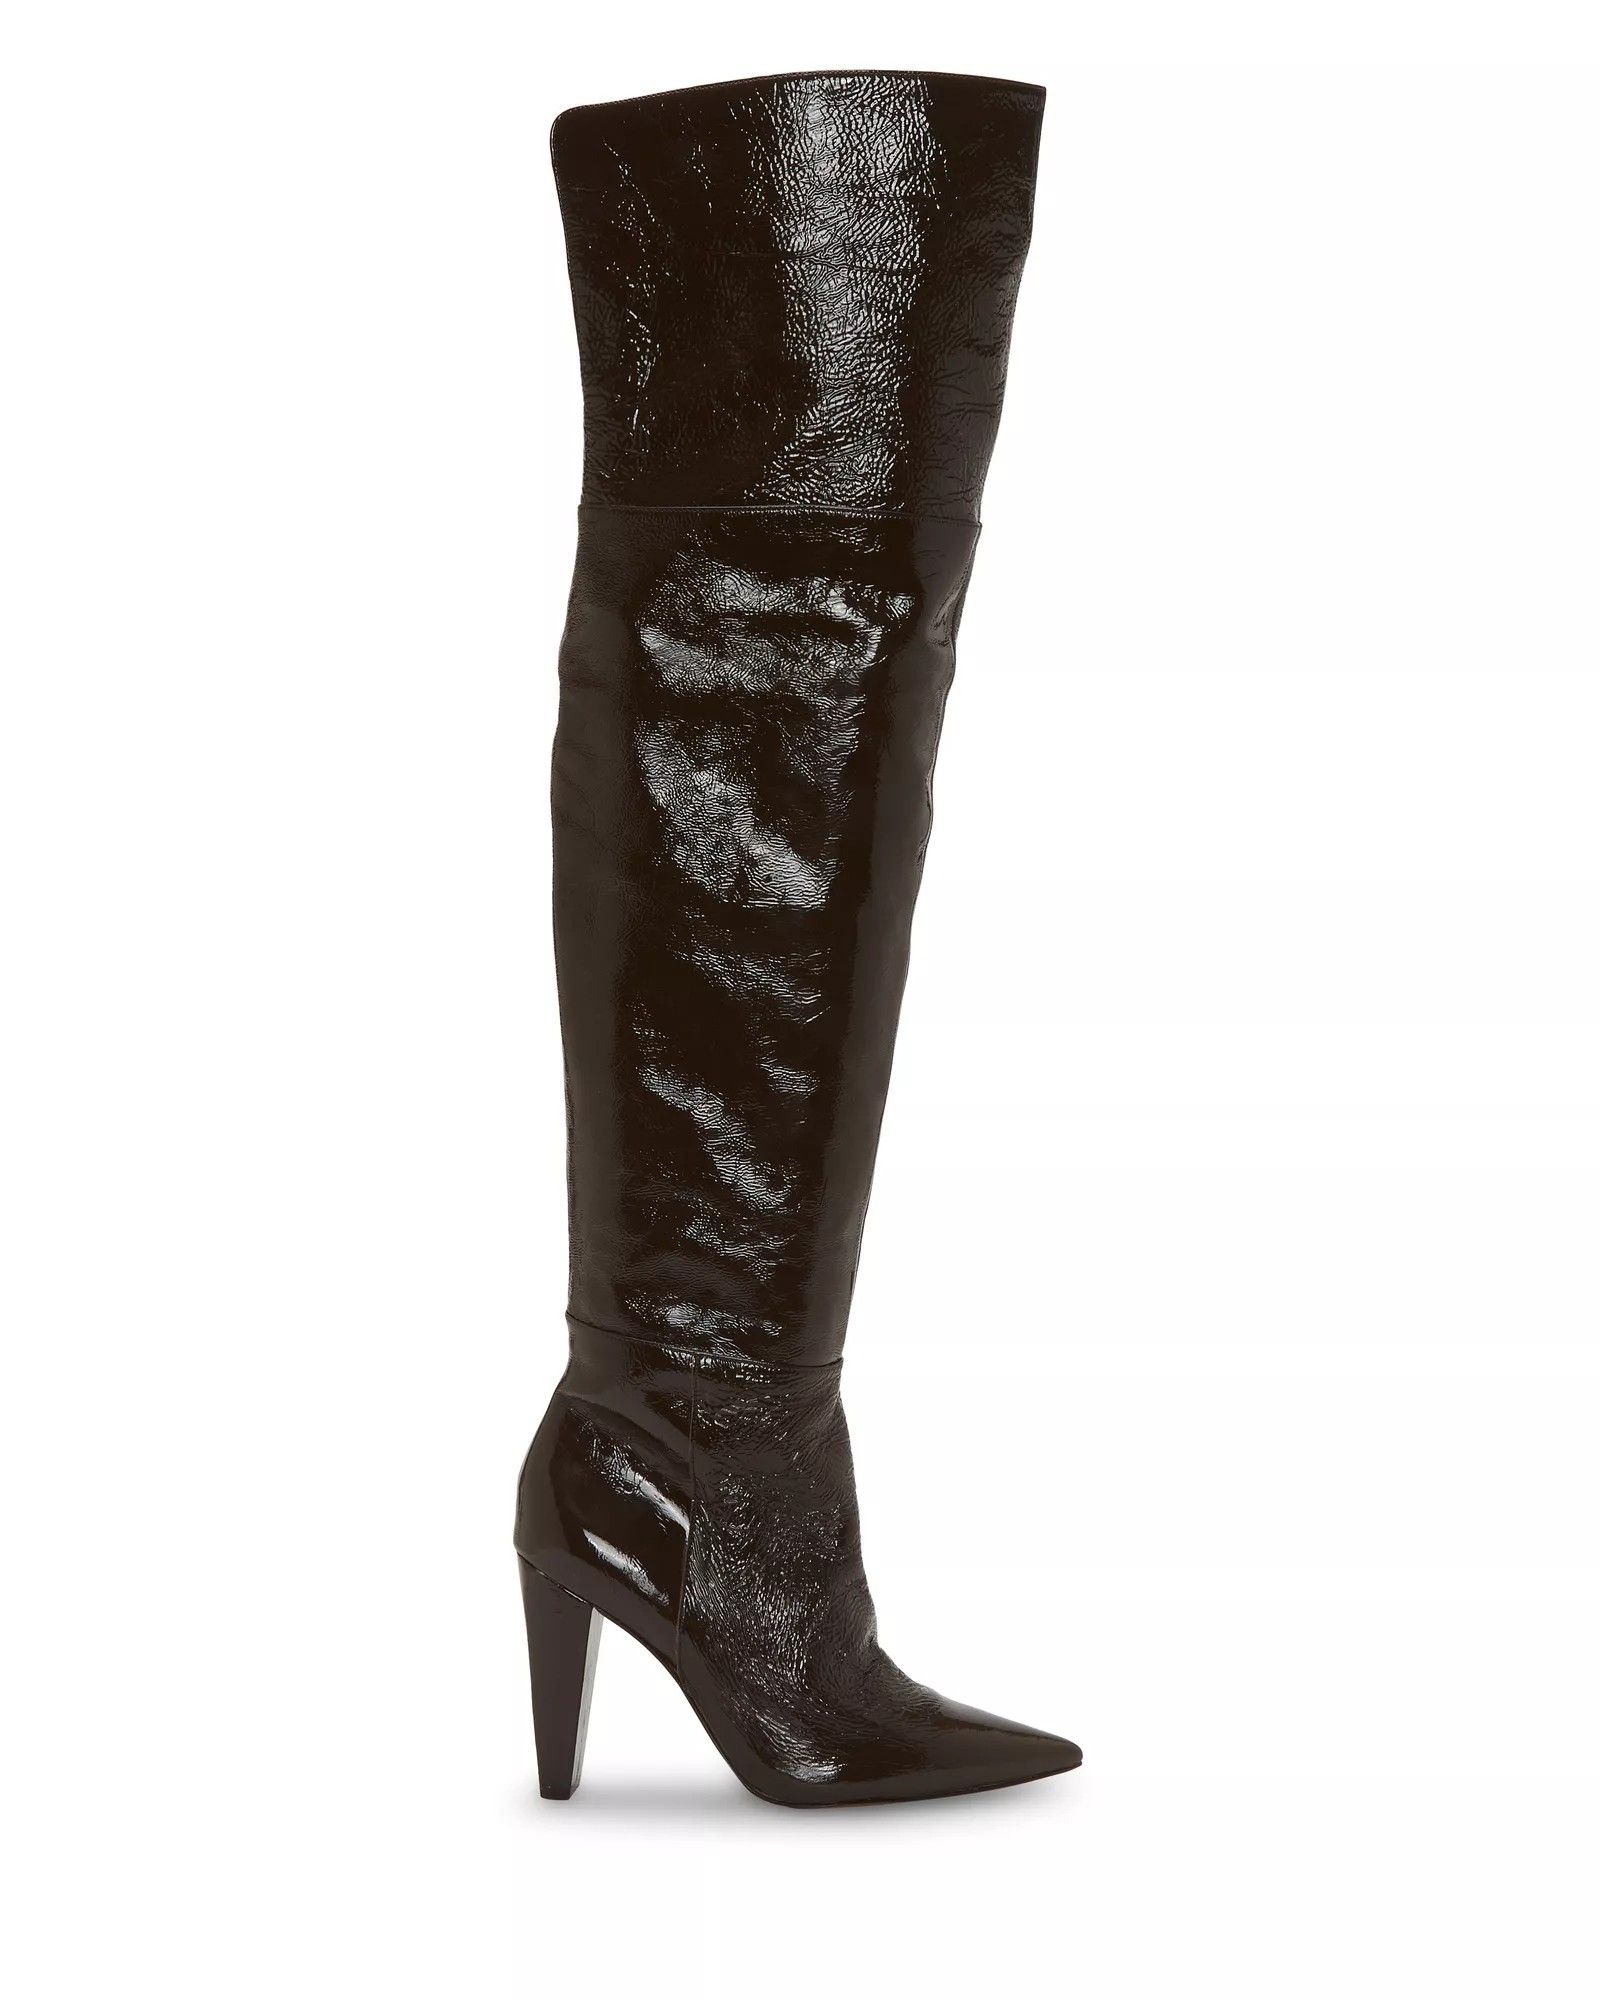 Vince Camuto Minnada Over The Knee Boot | Vince Camuto